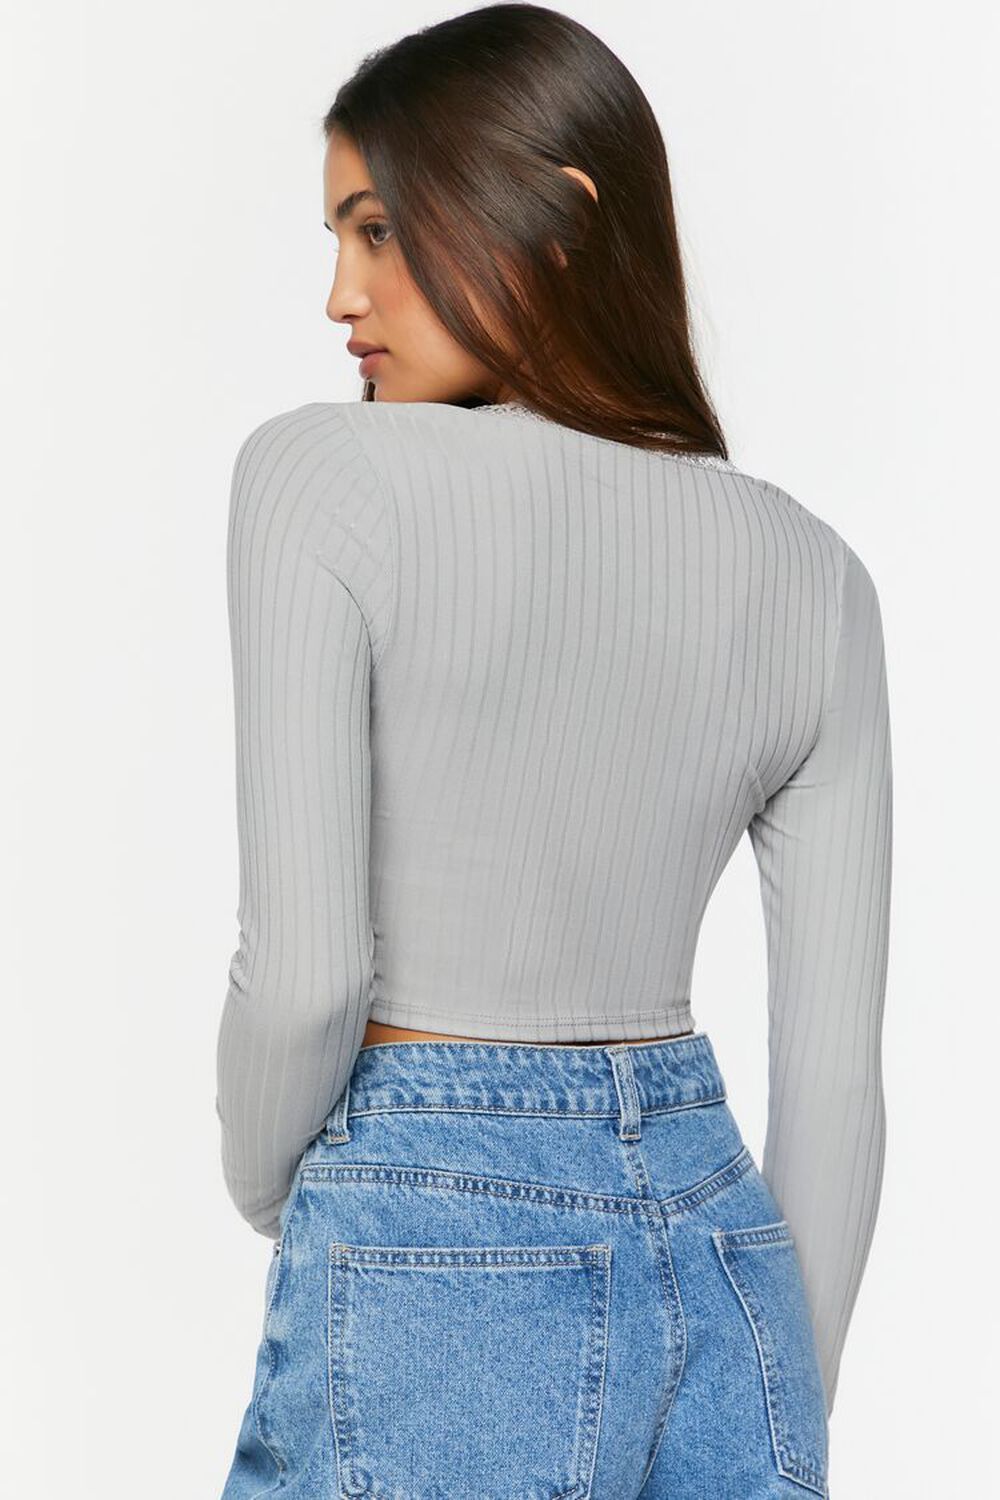 Forever 21 Cropped Long Sleeve Sweater Women Size Small Gray